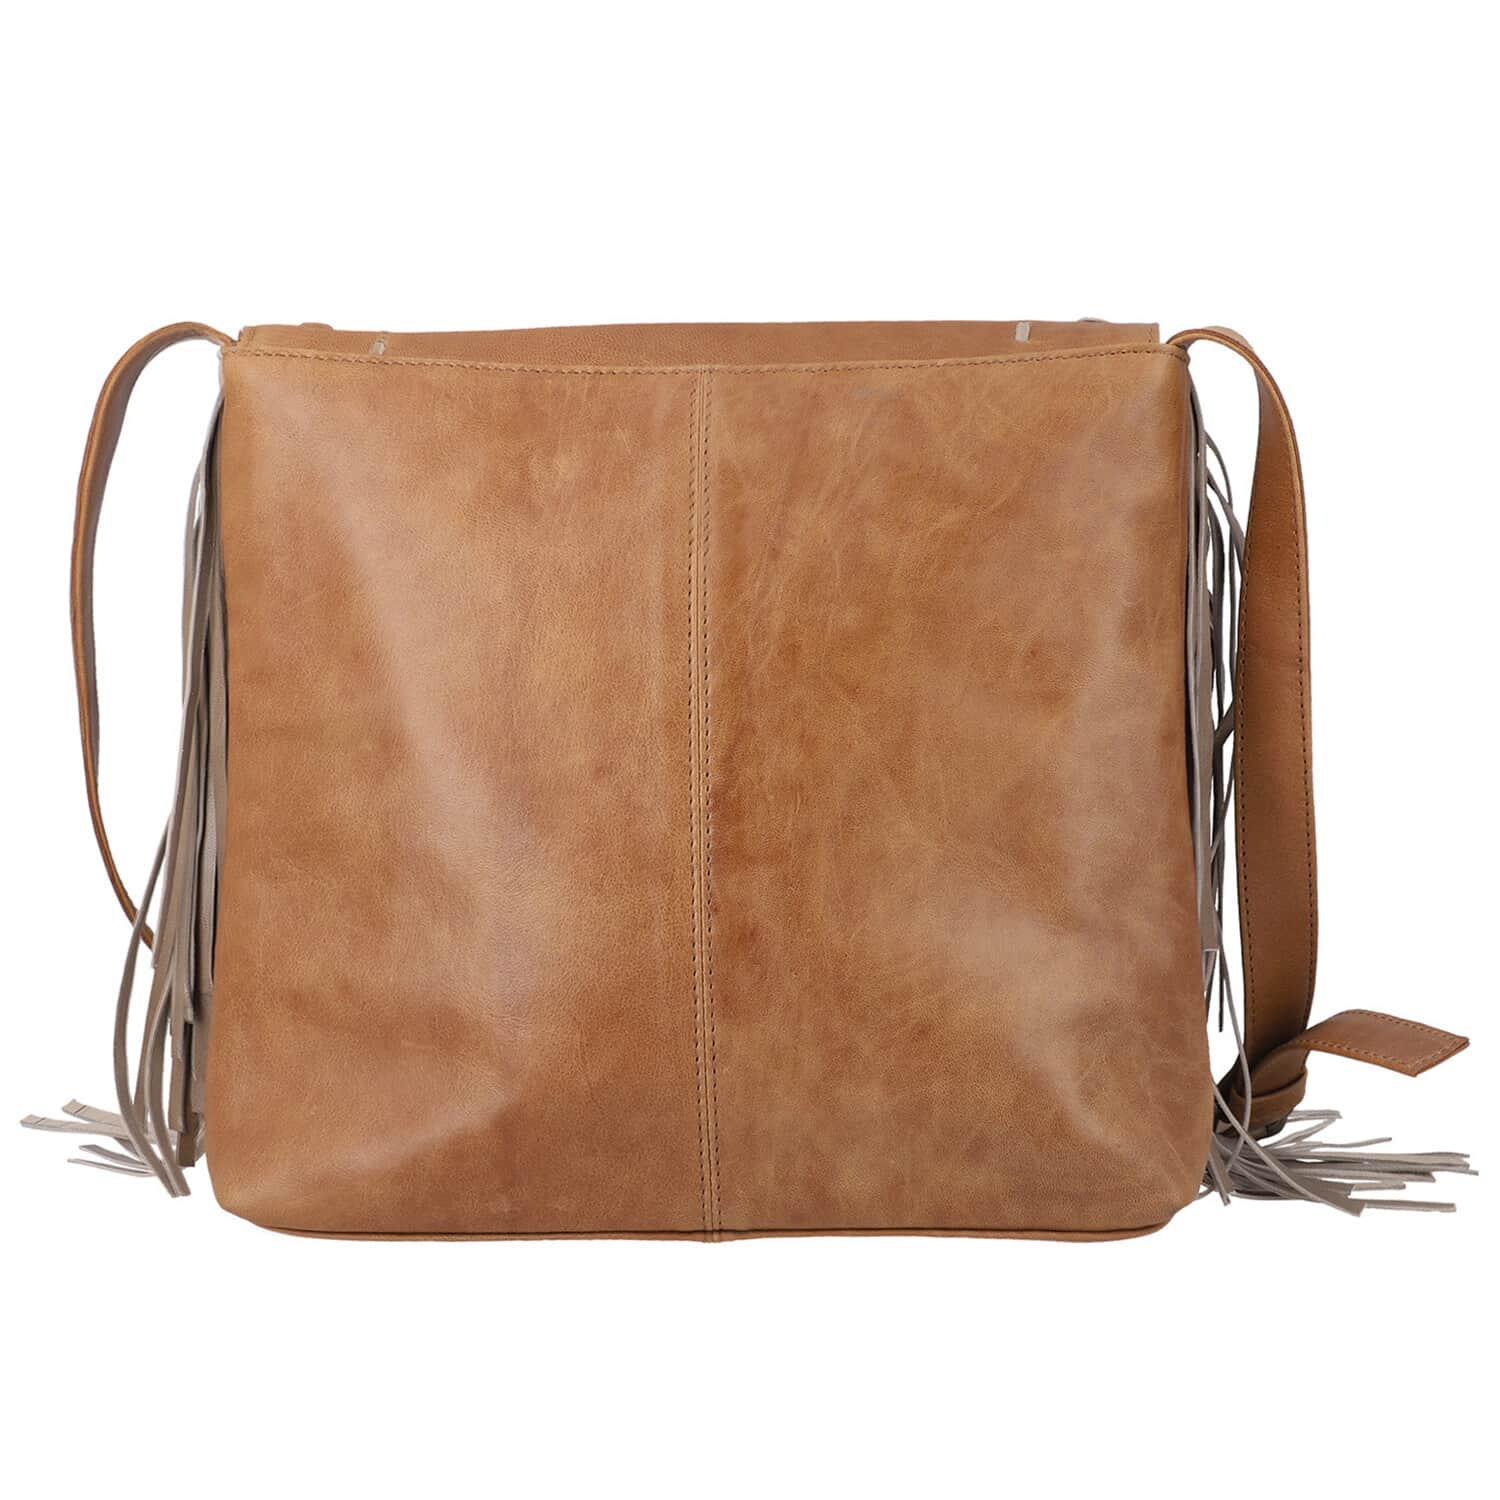 Buy Tan Genuine Leather Fringes Crossbody Bag with Agate Stone at